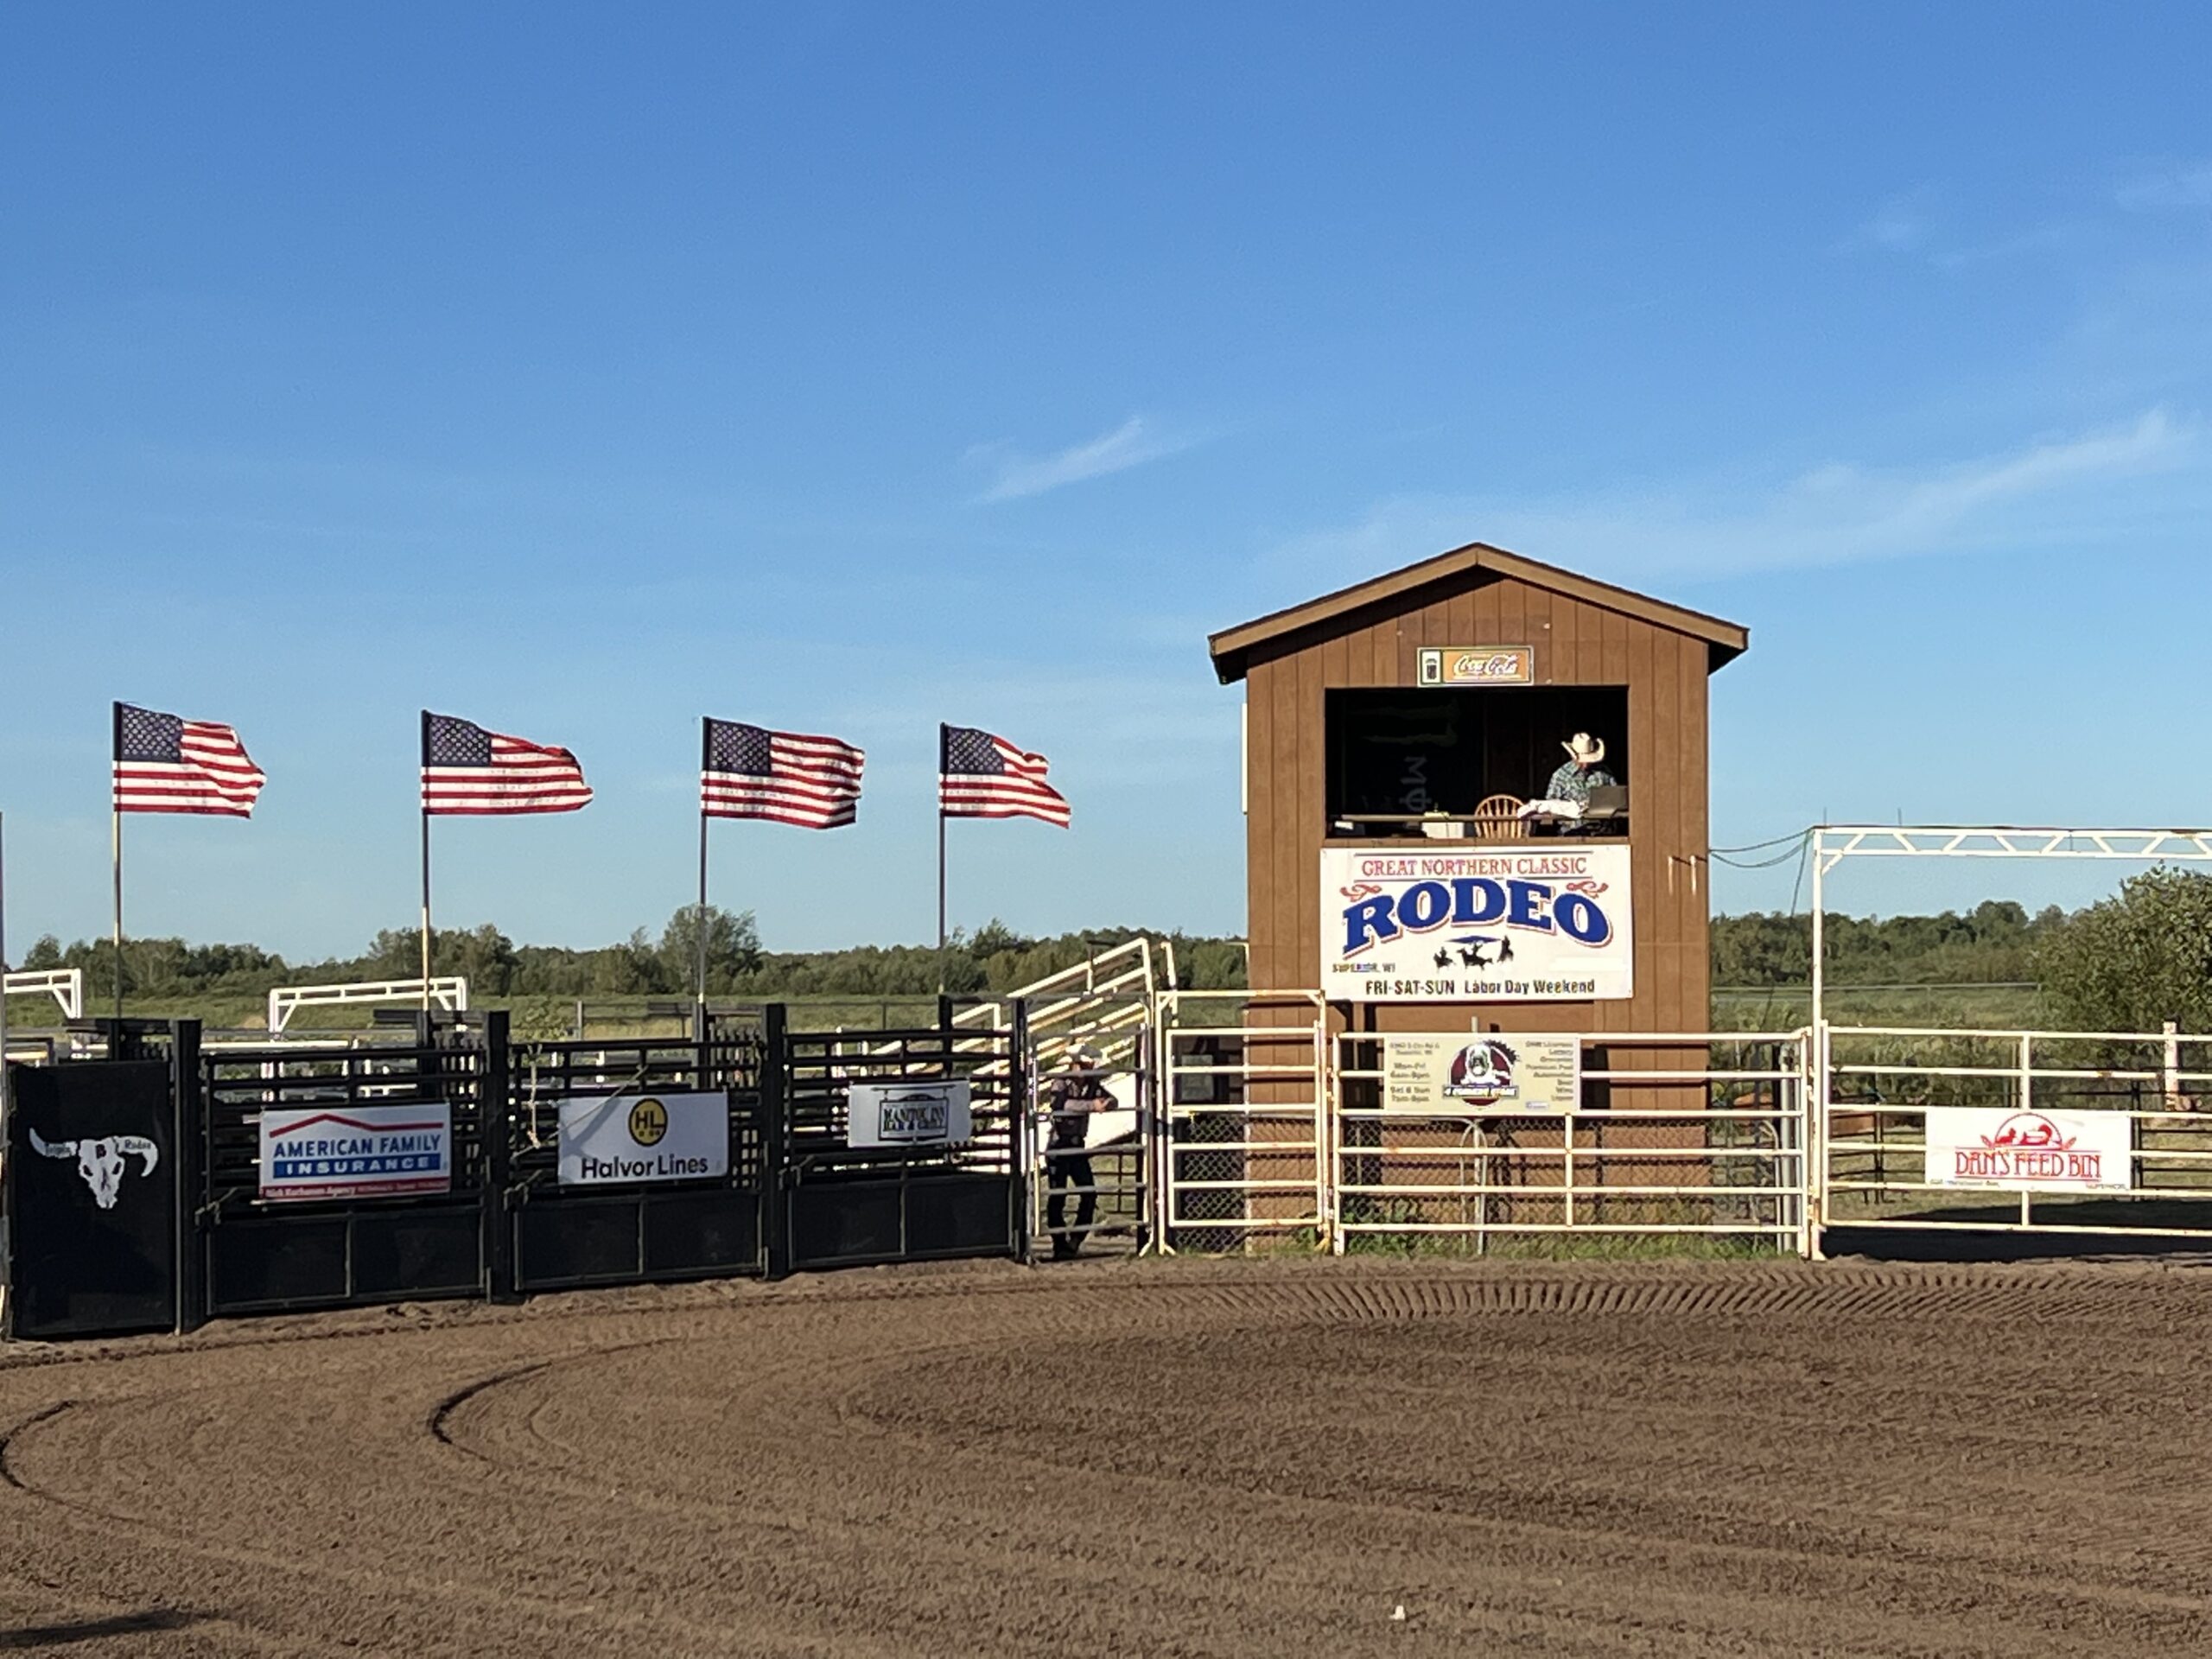 rodeo sign next to American flags